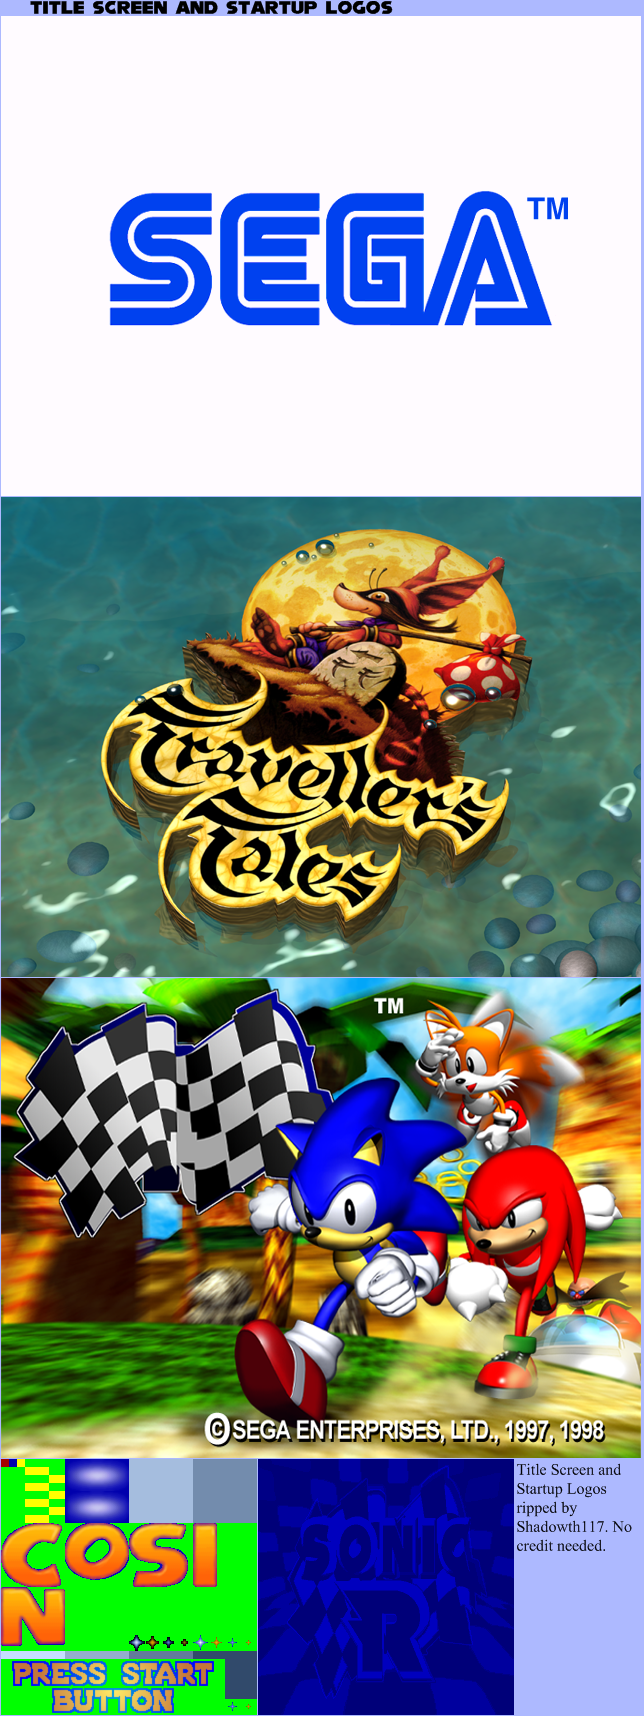 Title Screen and Startup Logos